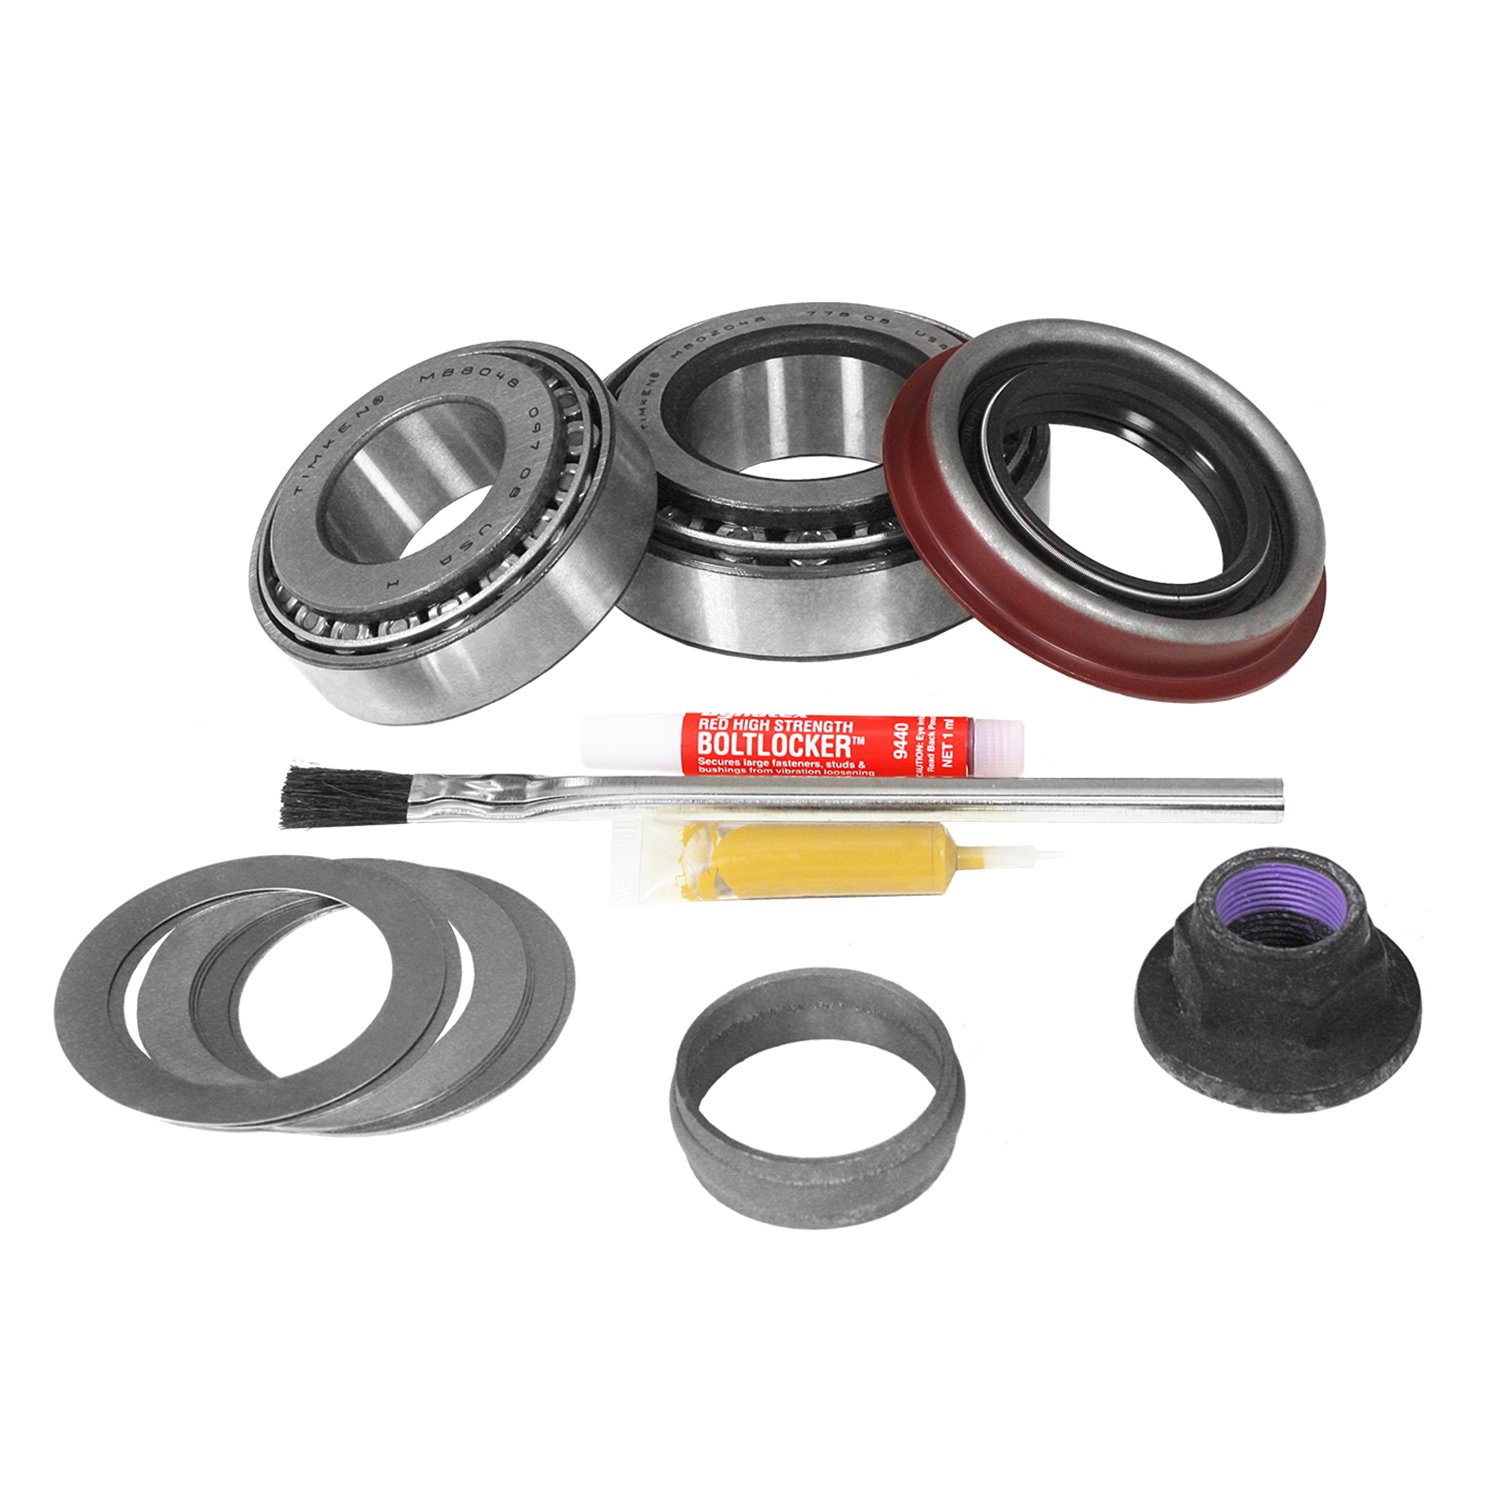 Pinion Install Kit For '00-'07 Ford 9.75 in. Diff With '11-Up Ring & Pinion